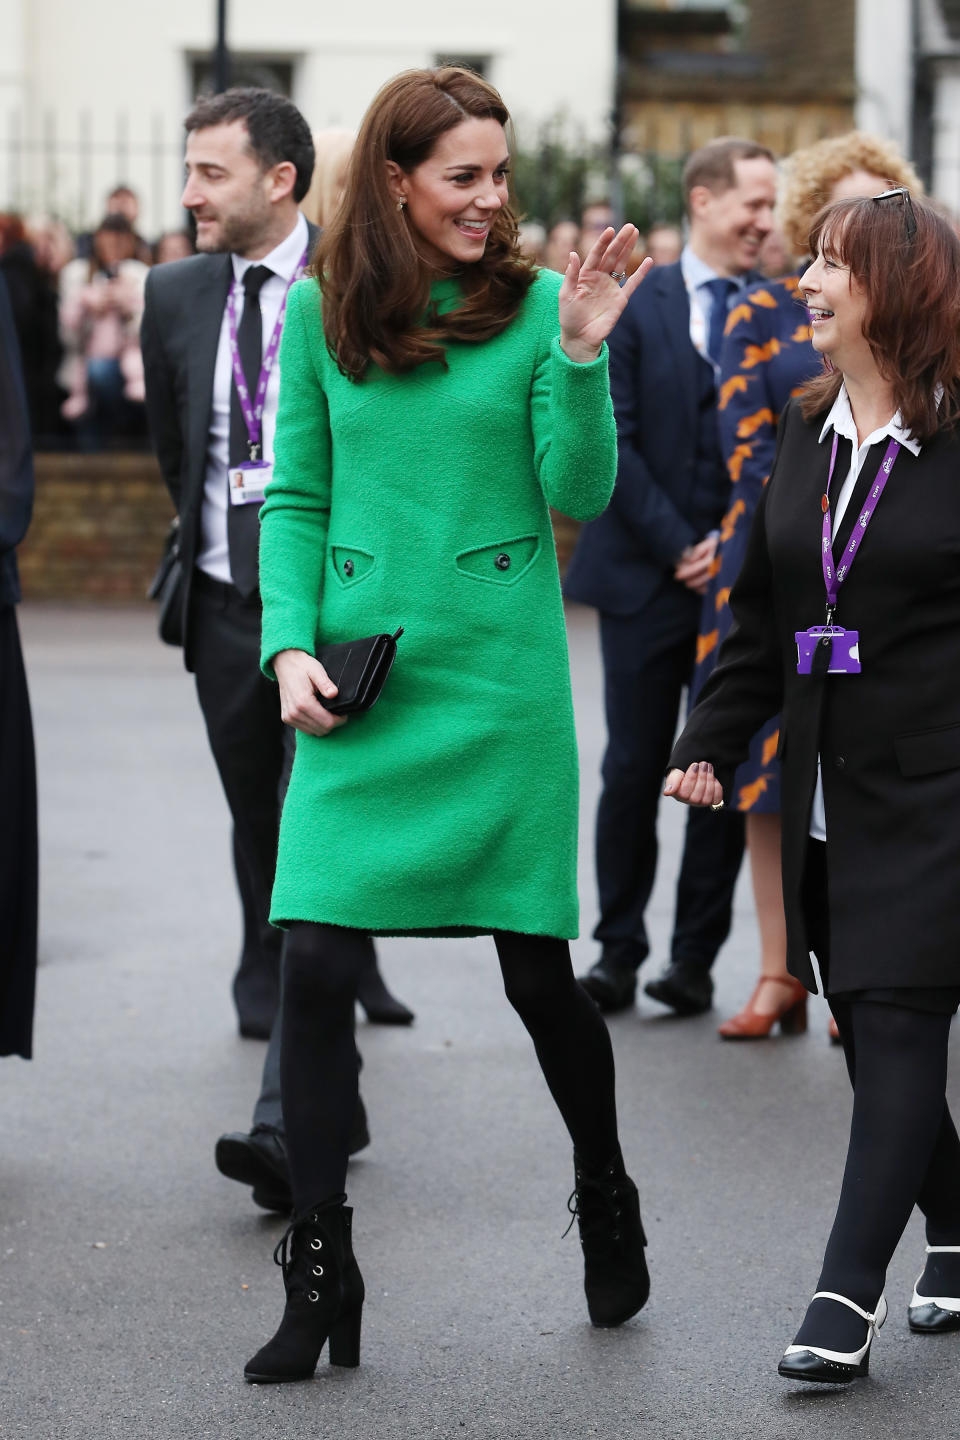 Kate Middleton paid a visit to <span>Lavender Primary School in North </span>London to support Children’s Mental Health Week but people couldn’t get over the ‘face’ in the dress. Source: Getty